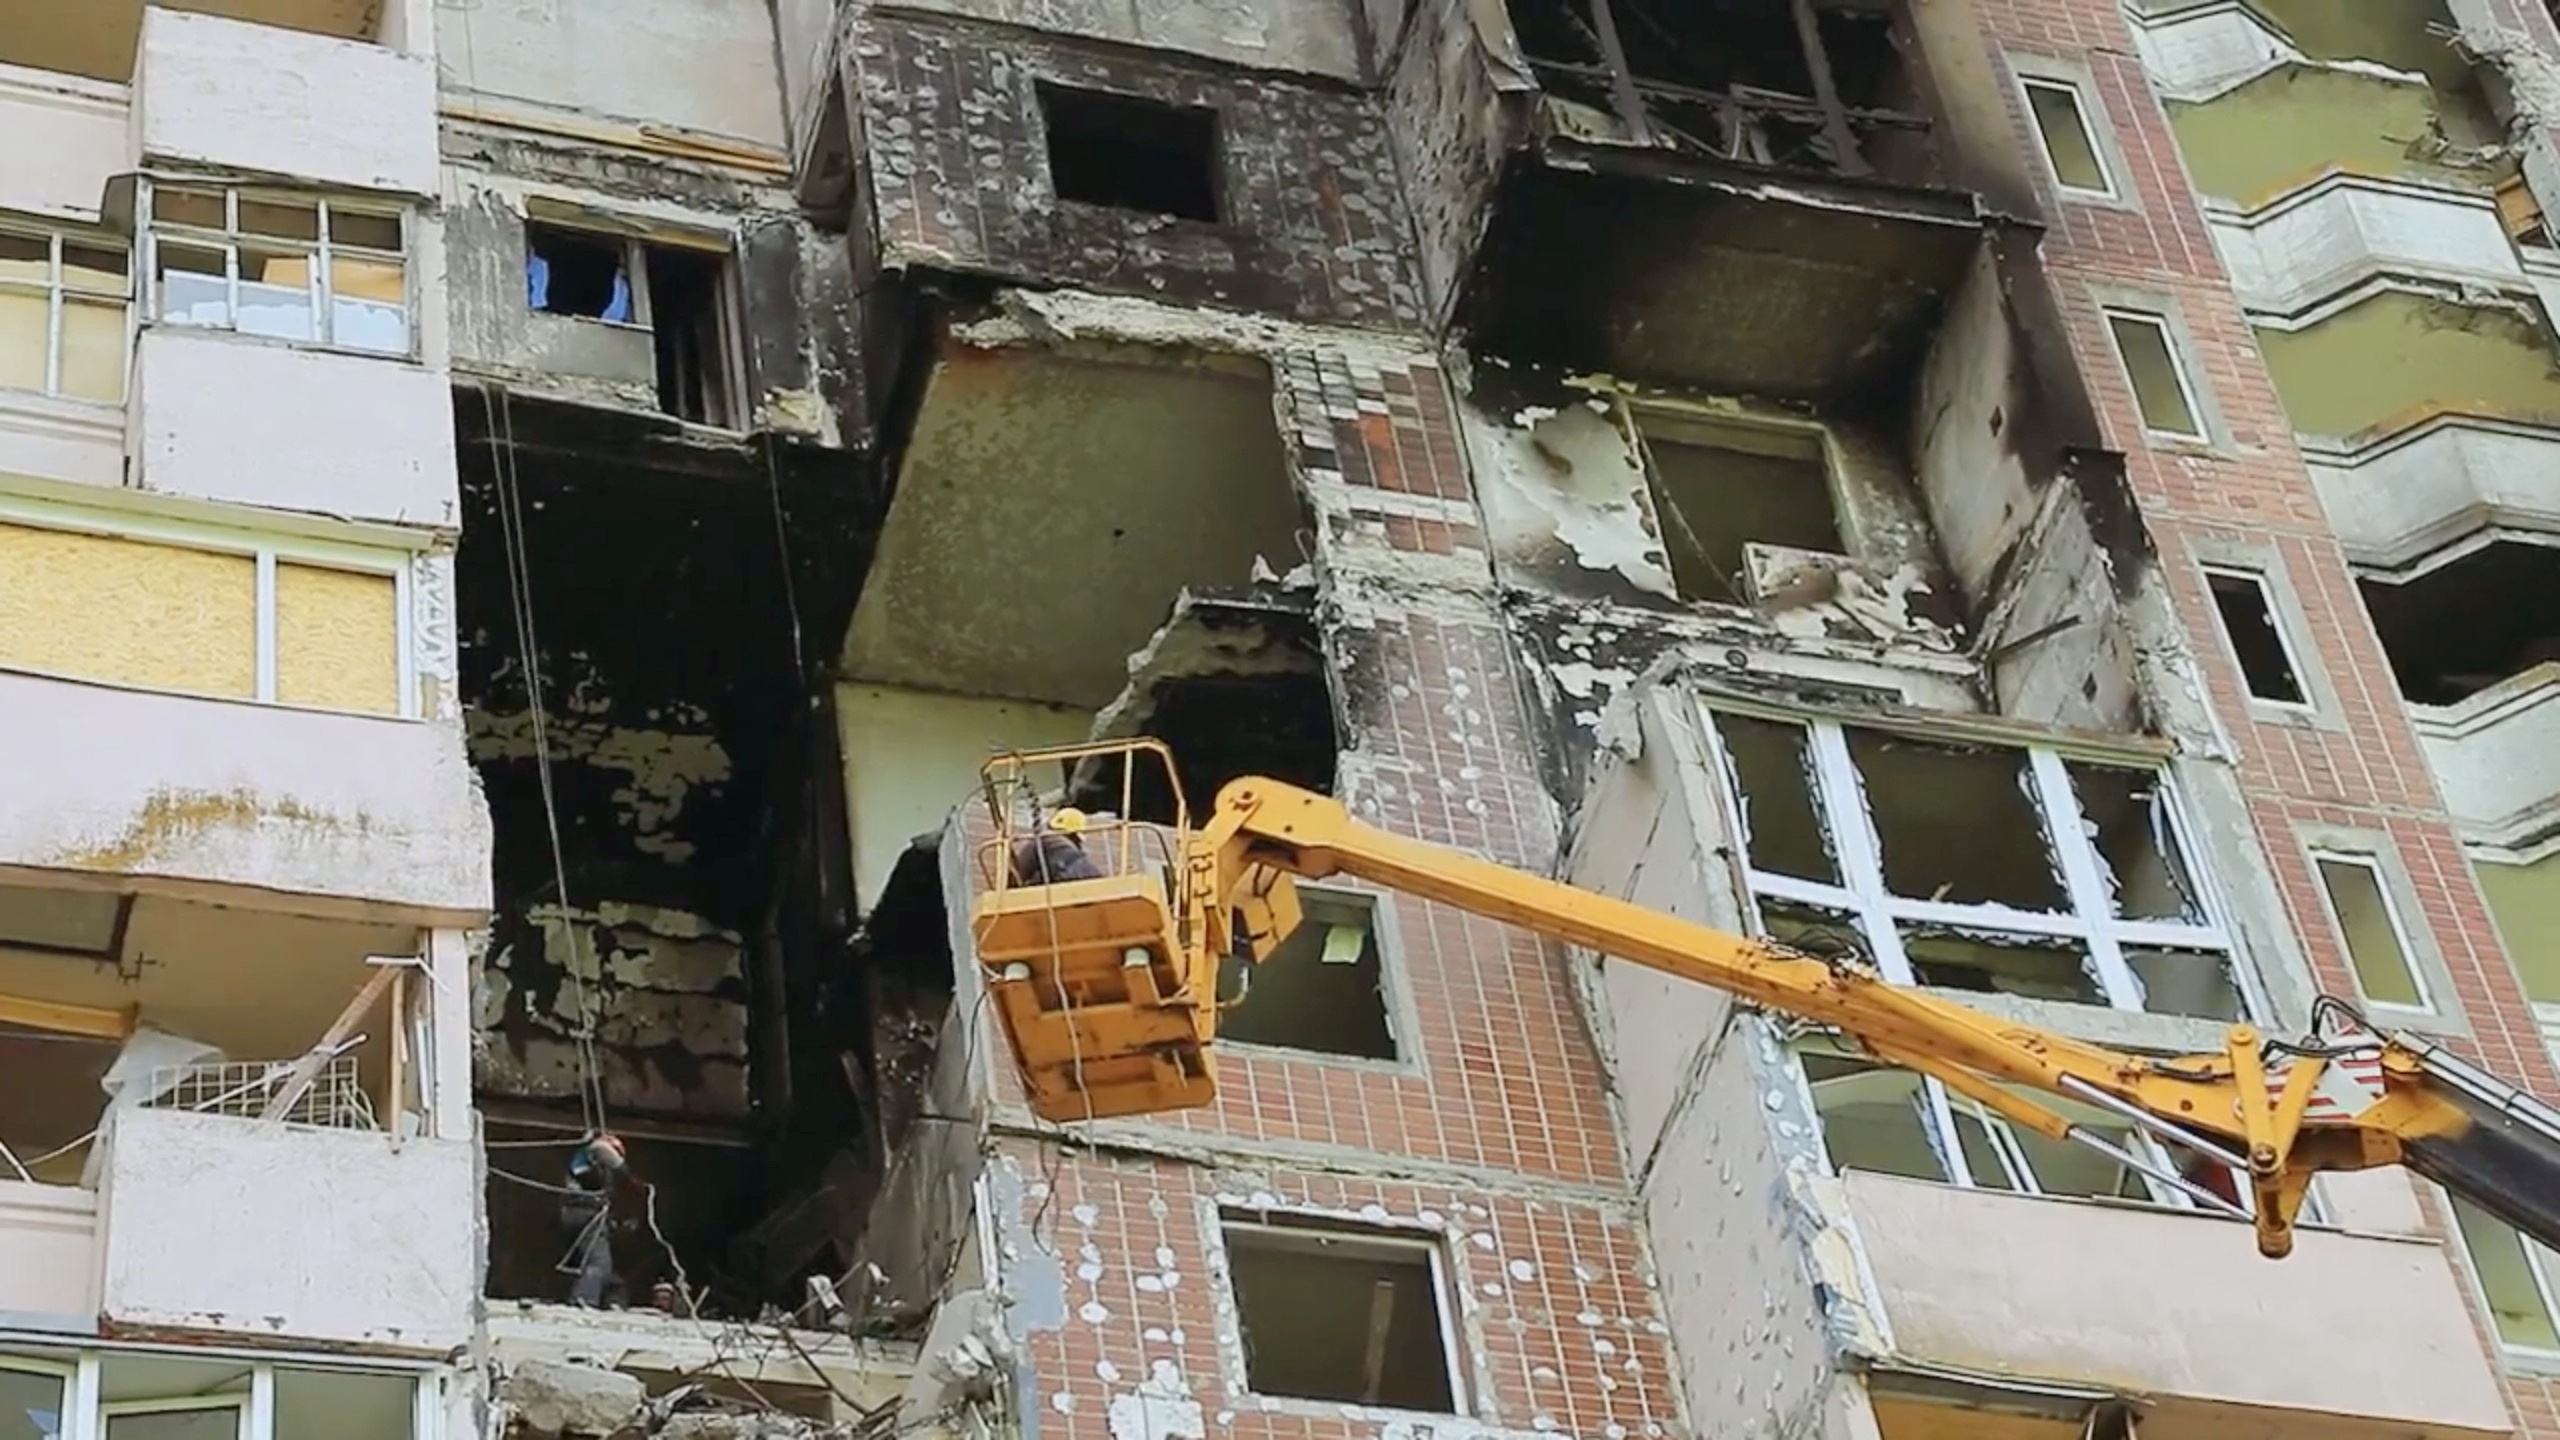 Emergency and recovery work underway in Kharkiv